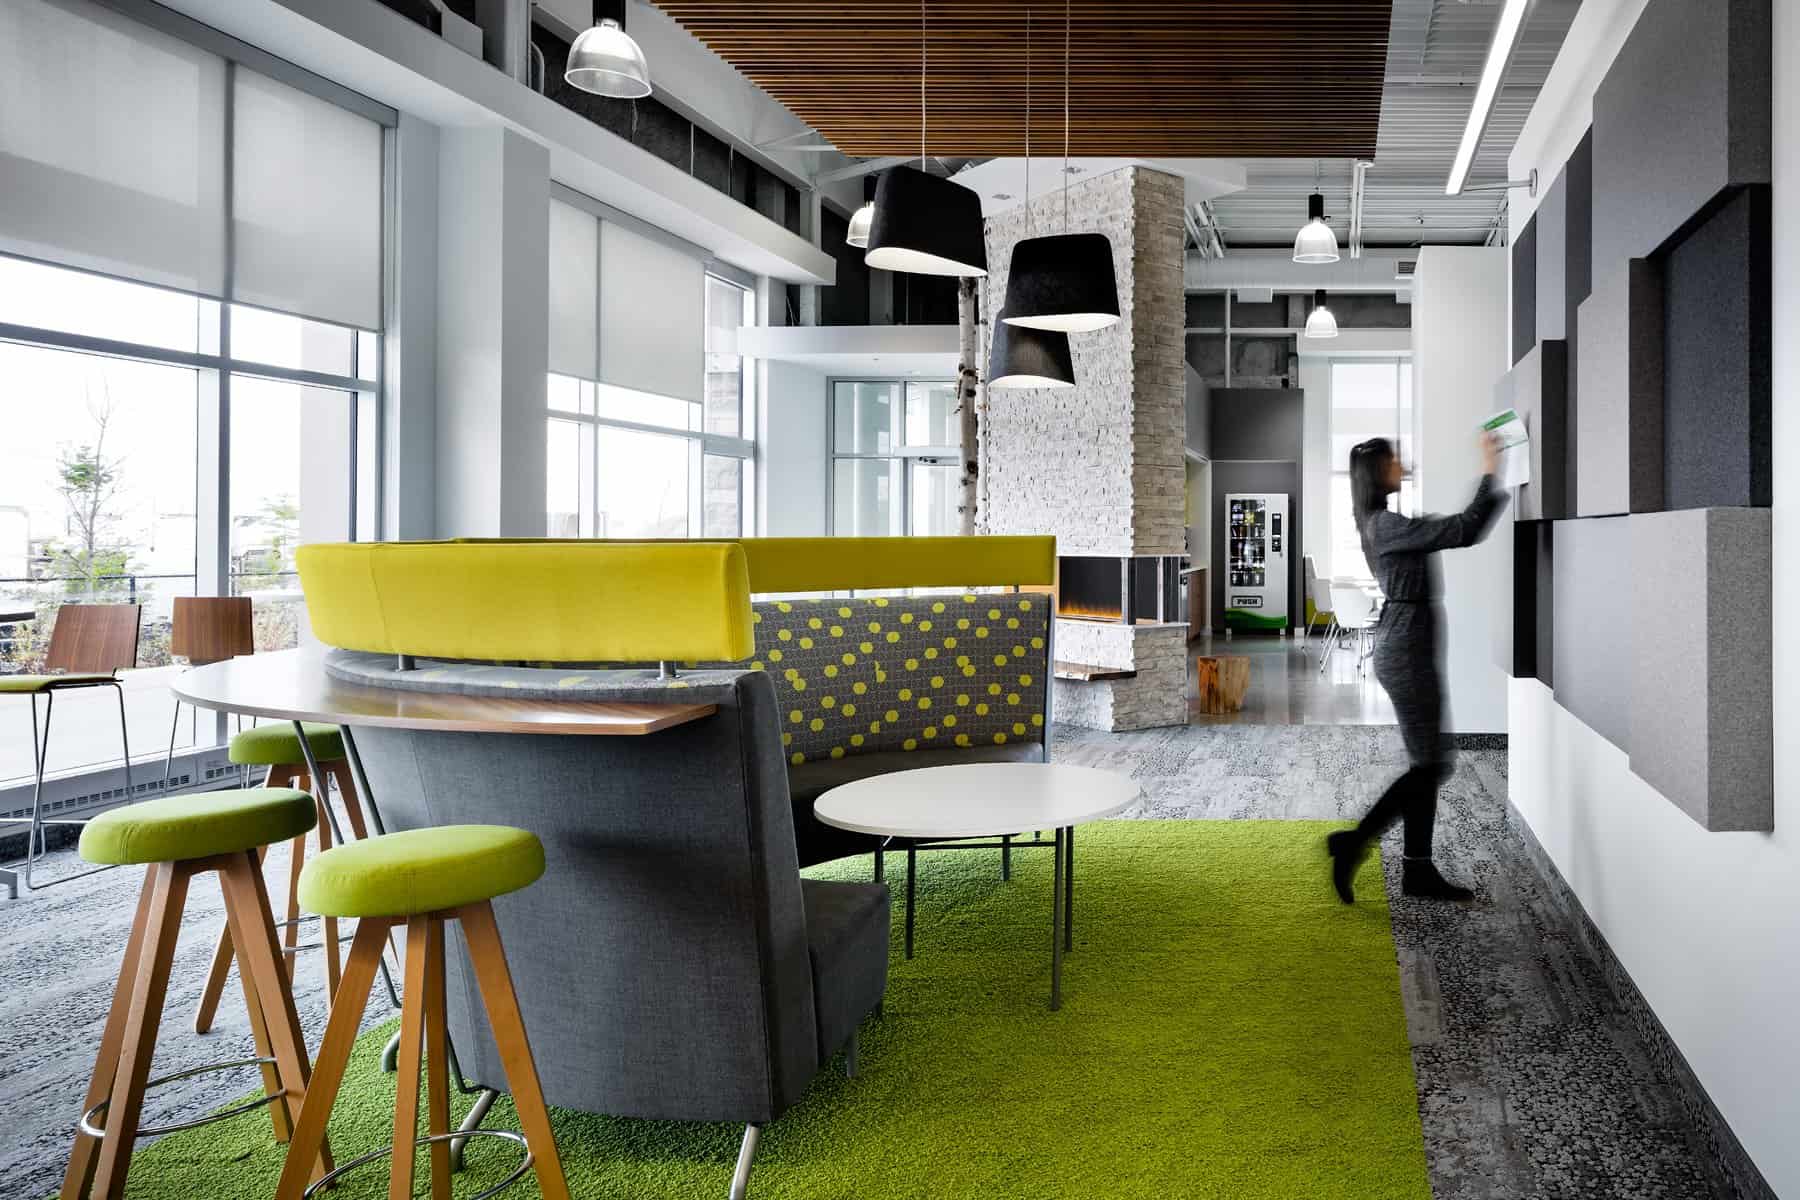  collaborative  workspace  furniture in Green Bay Systems 